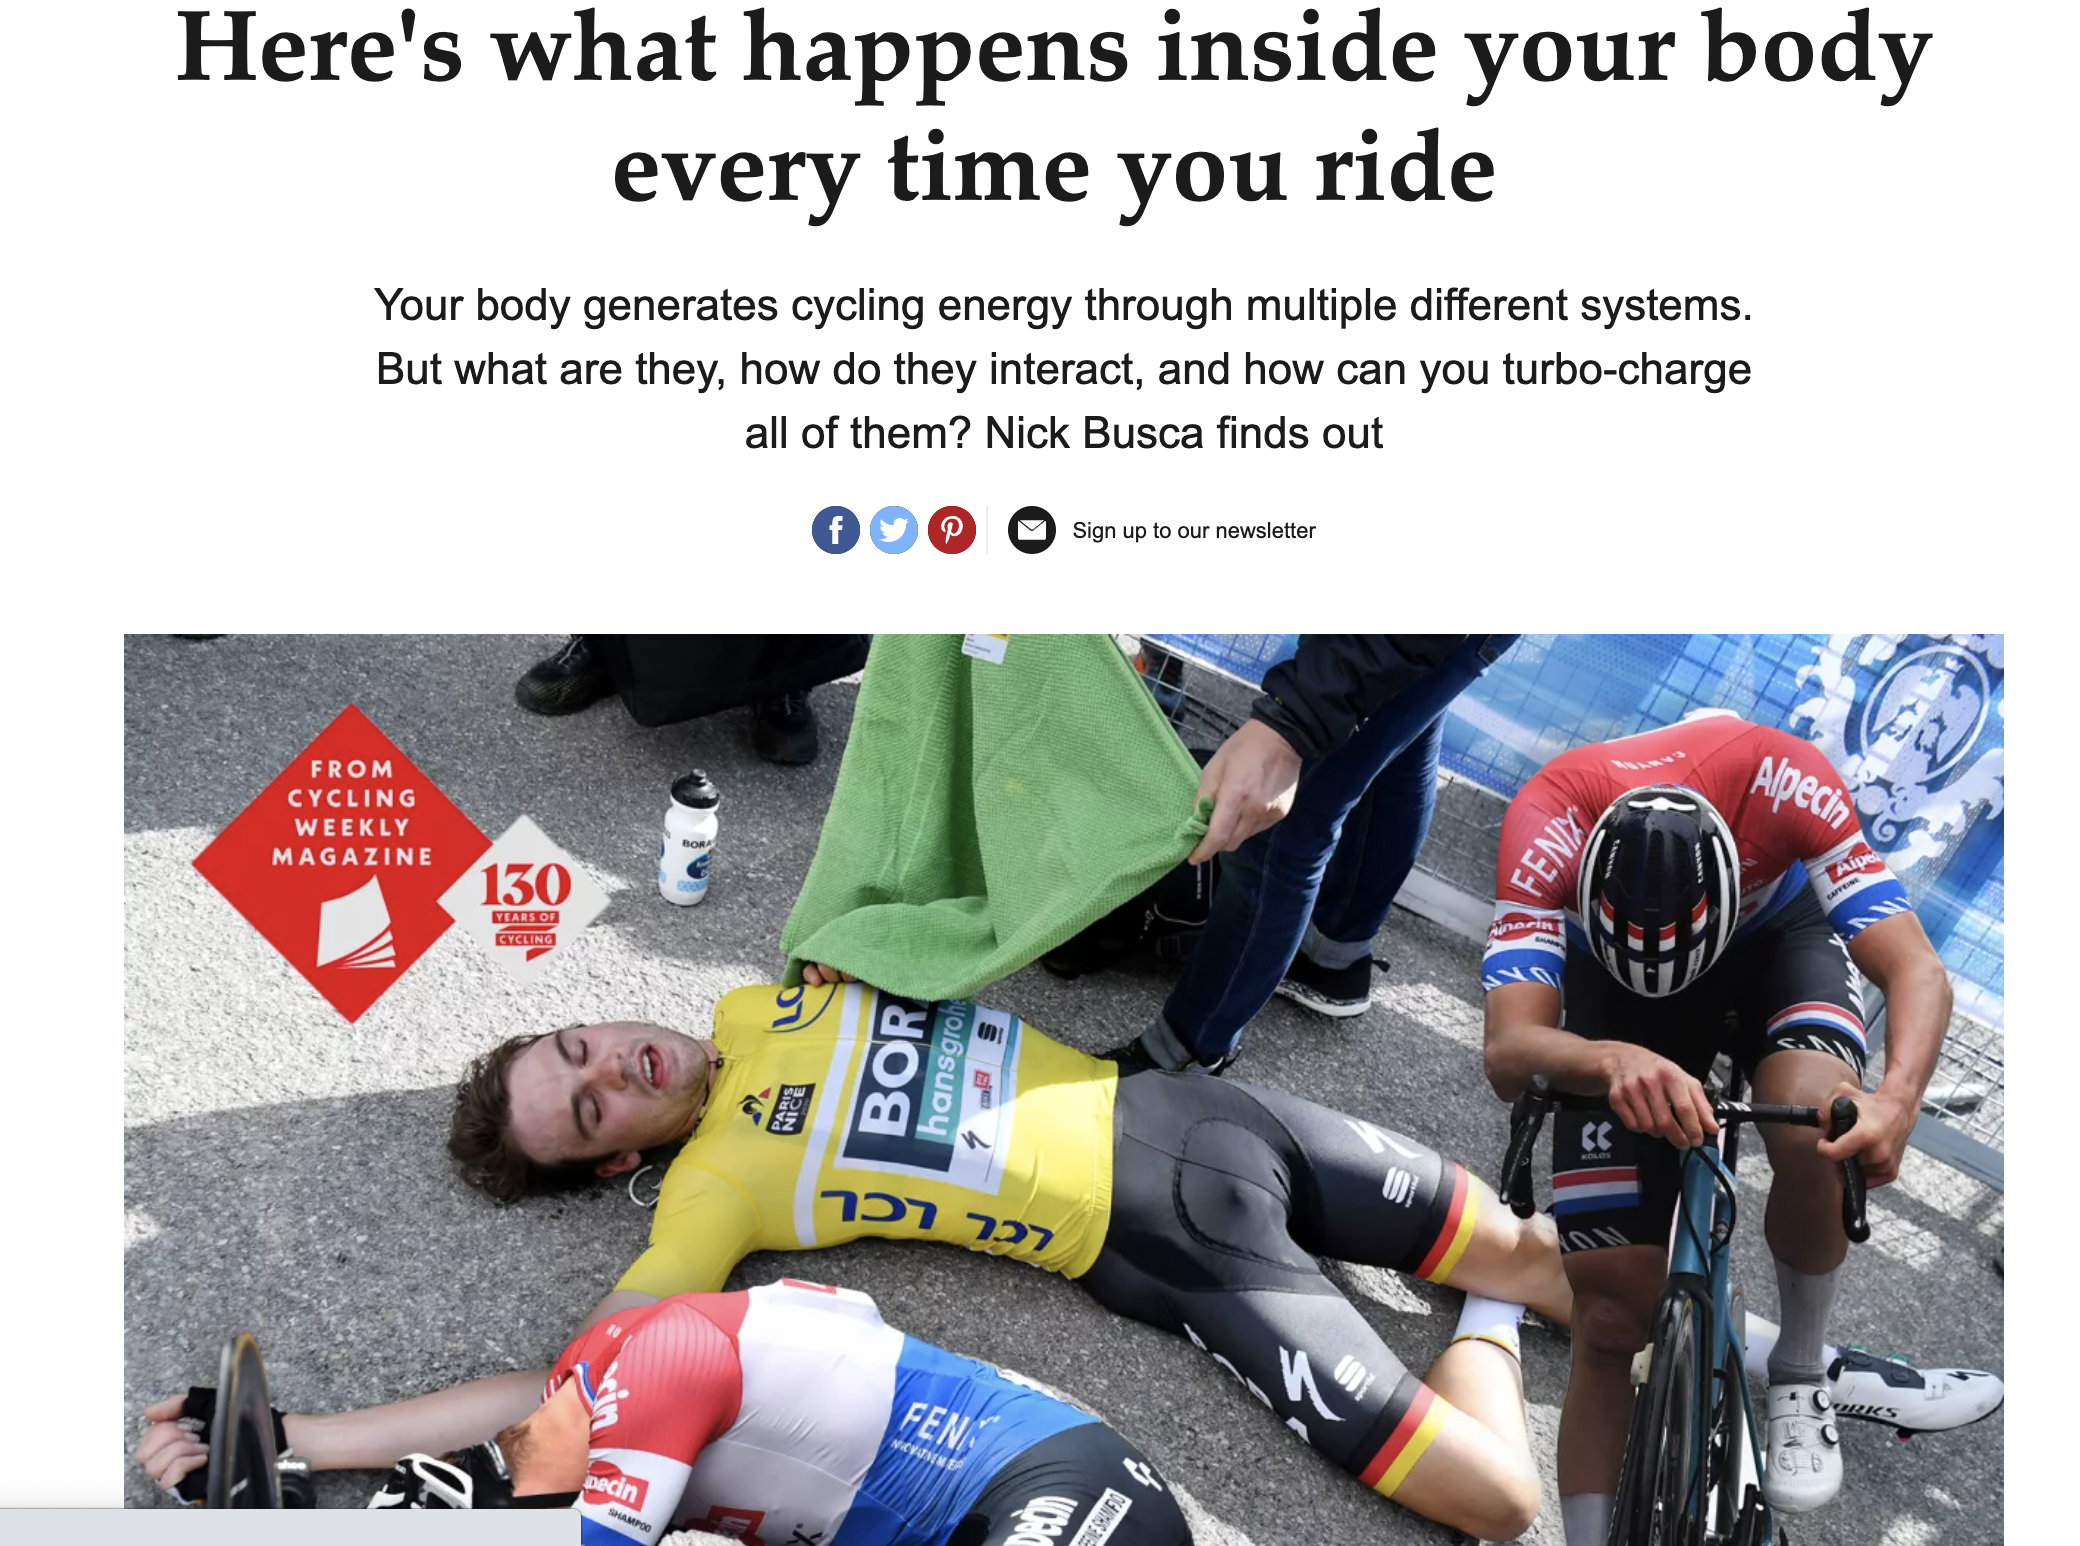 Home Top Story Here's what happens inside your body every time you ride